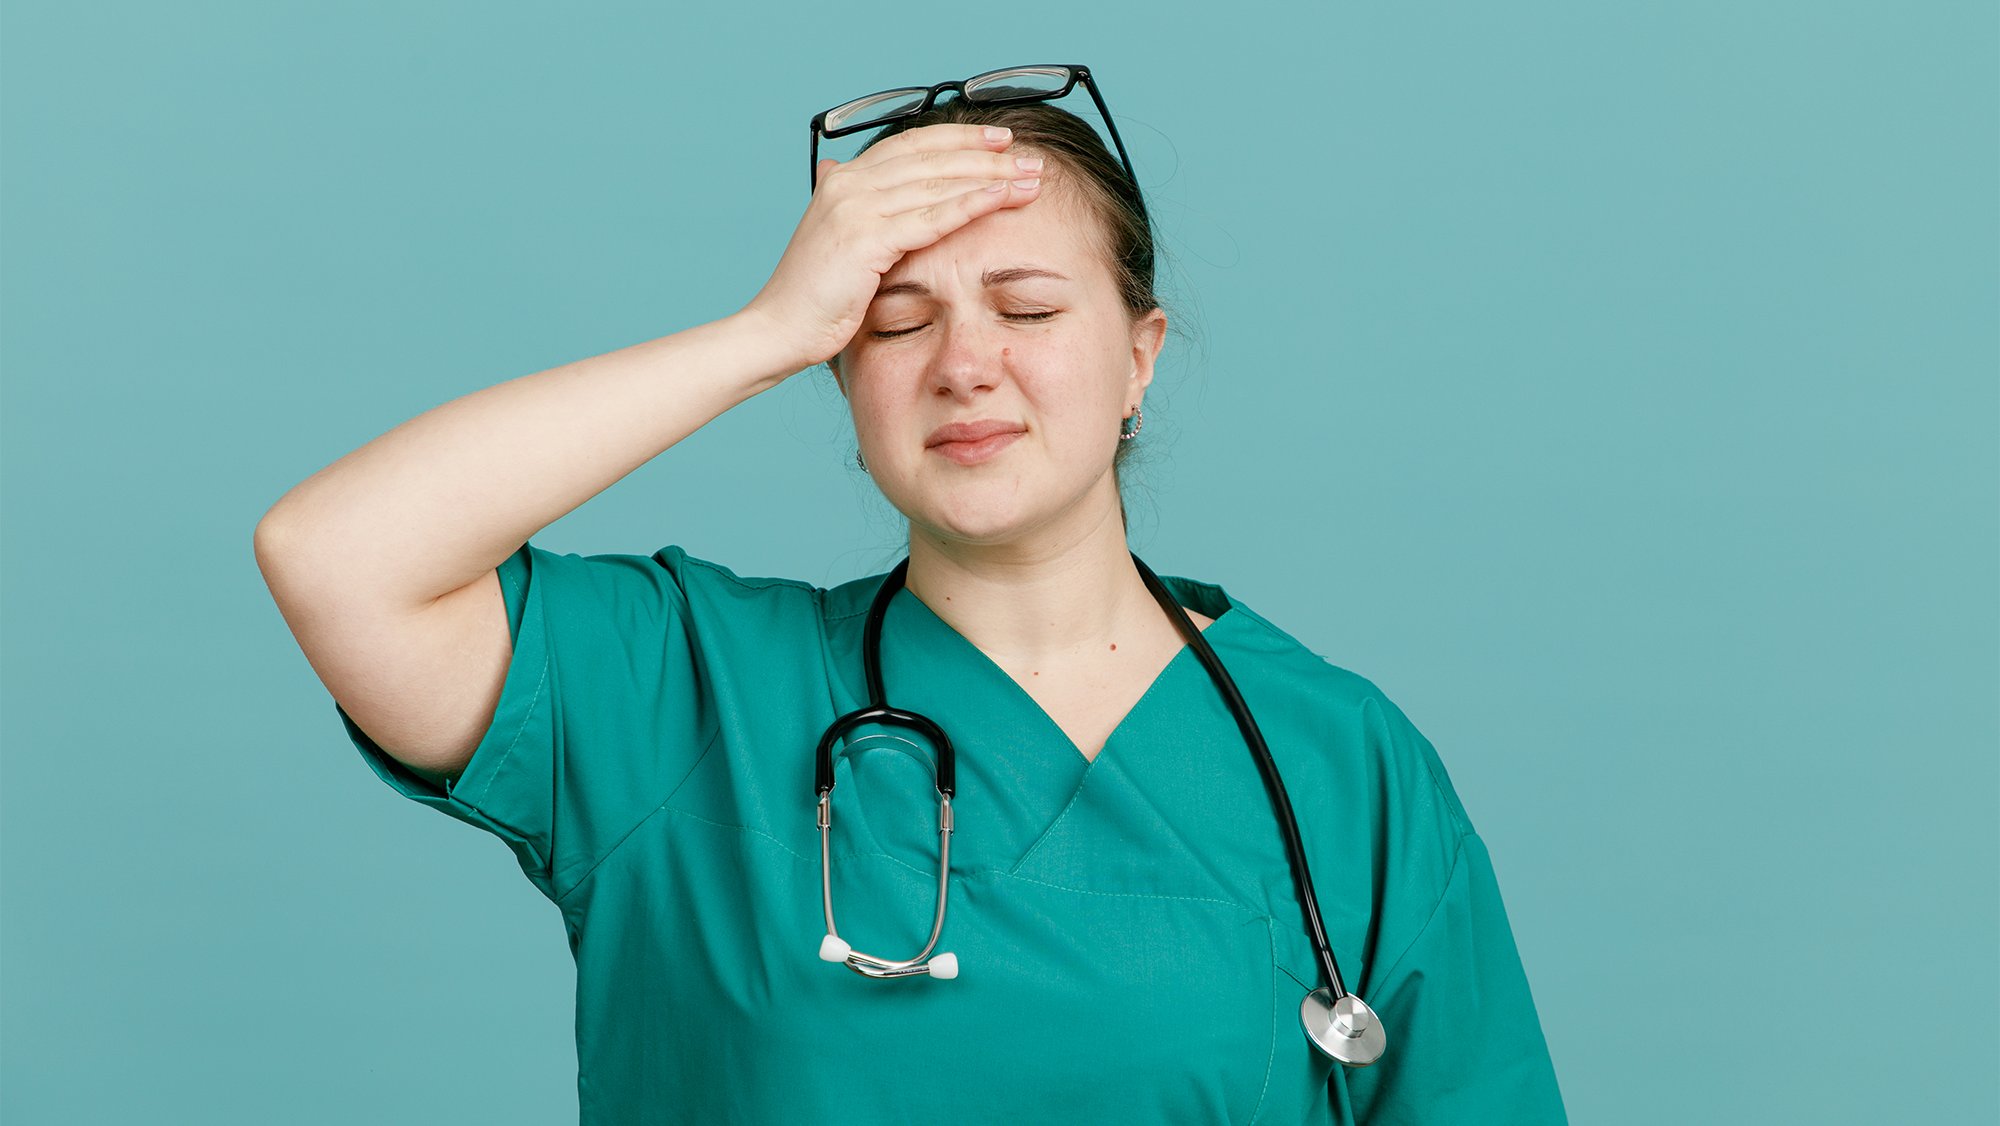 What To Do Next You’re Laid Off From Your Nursing Job